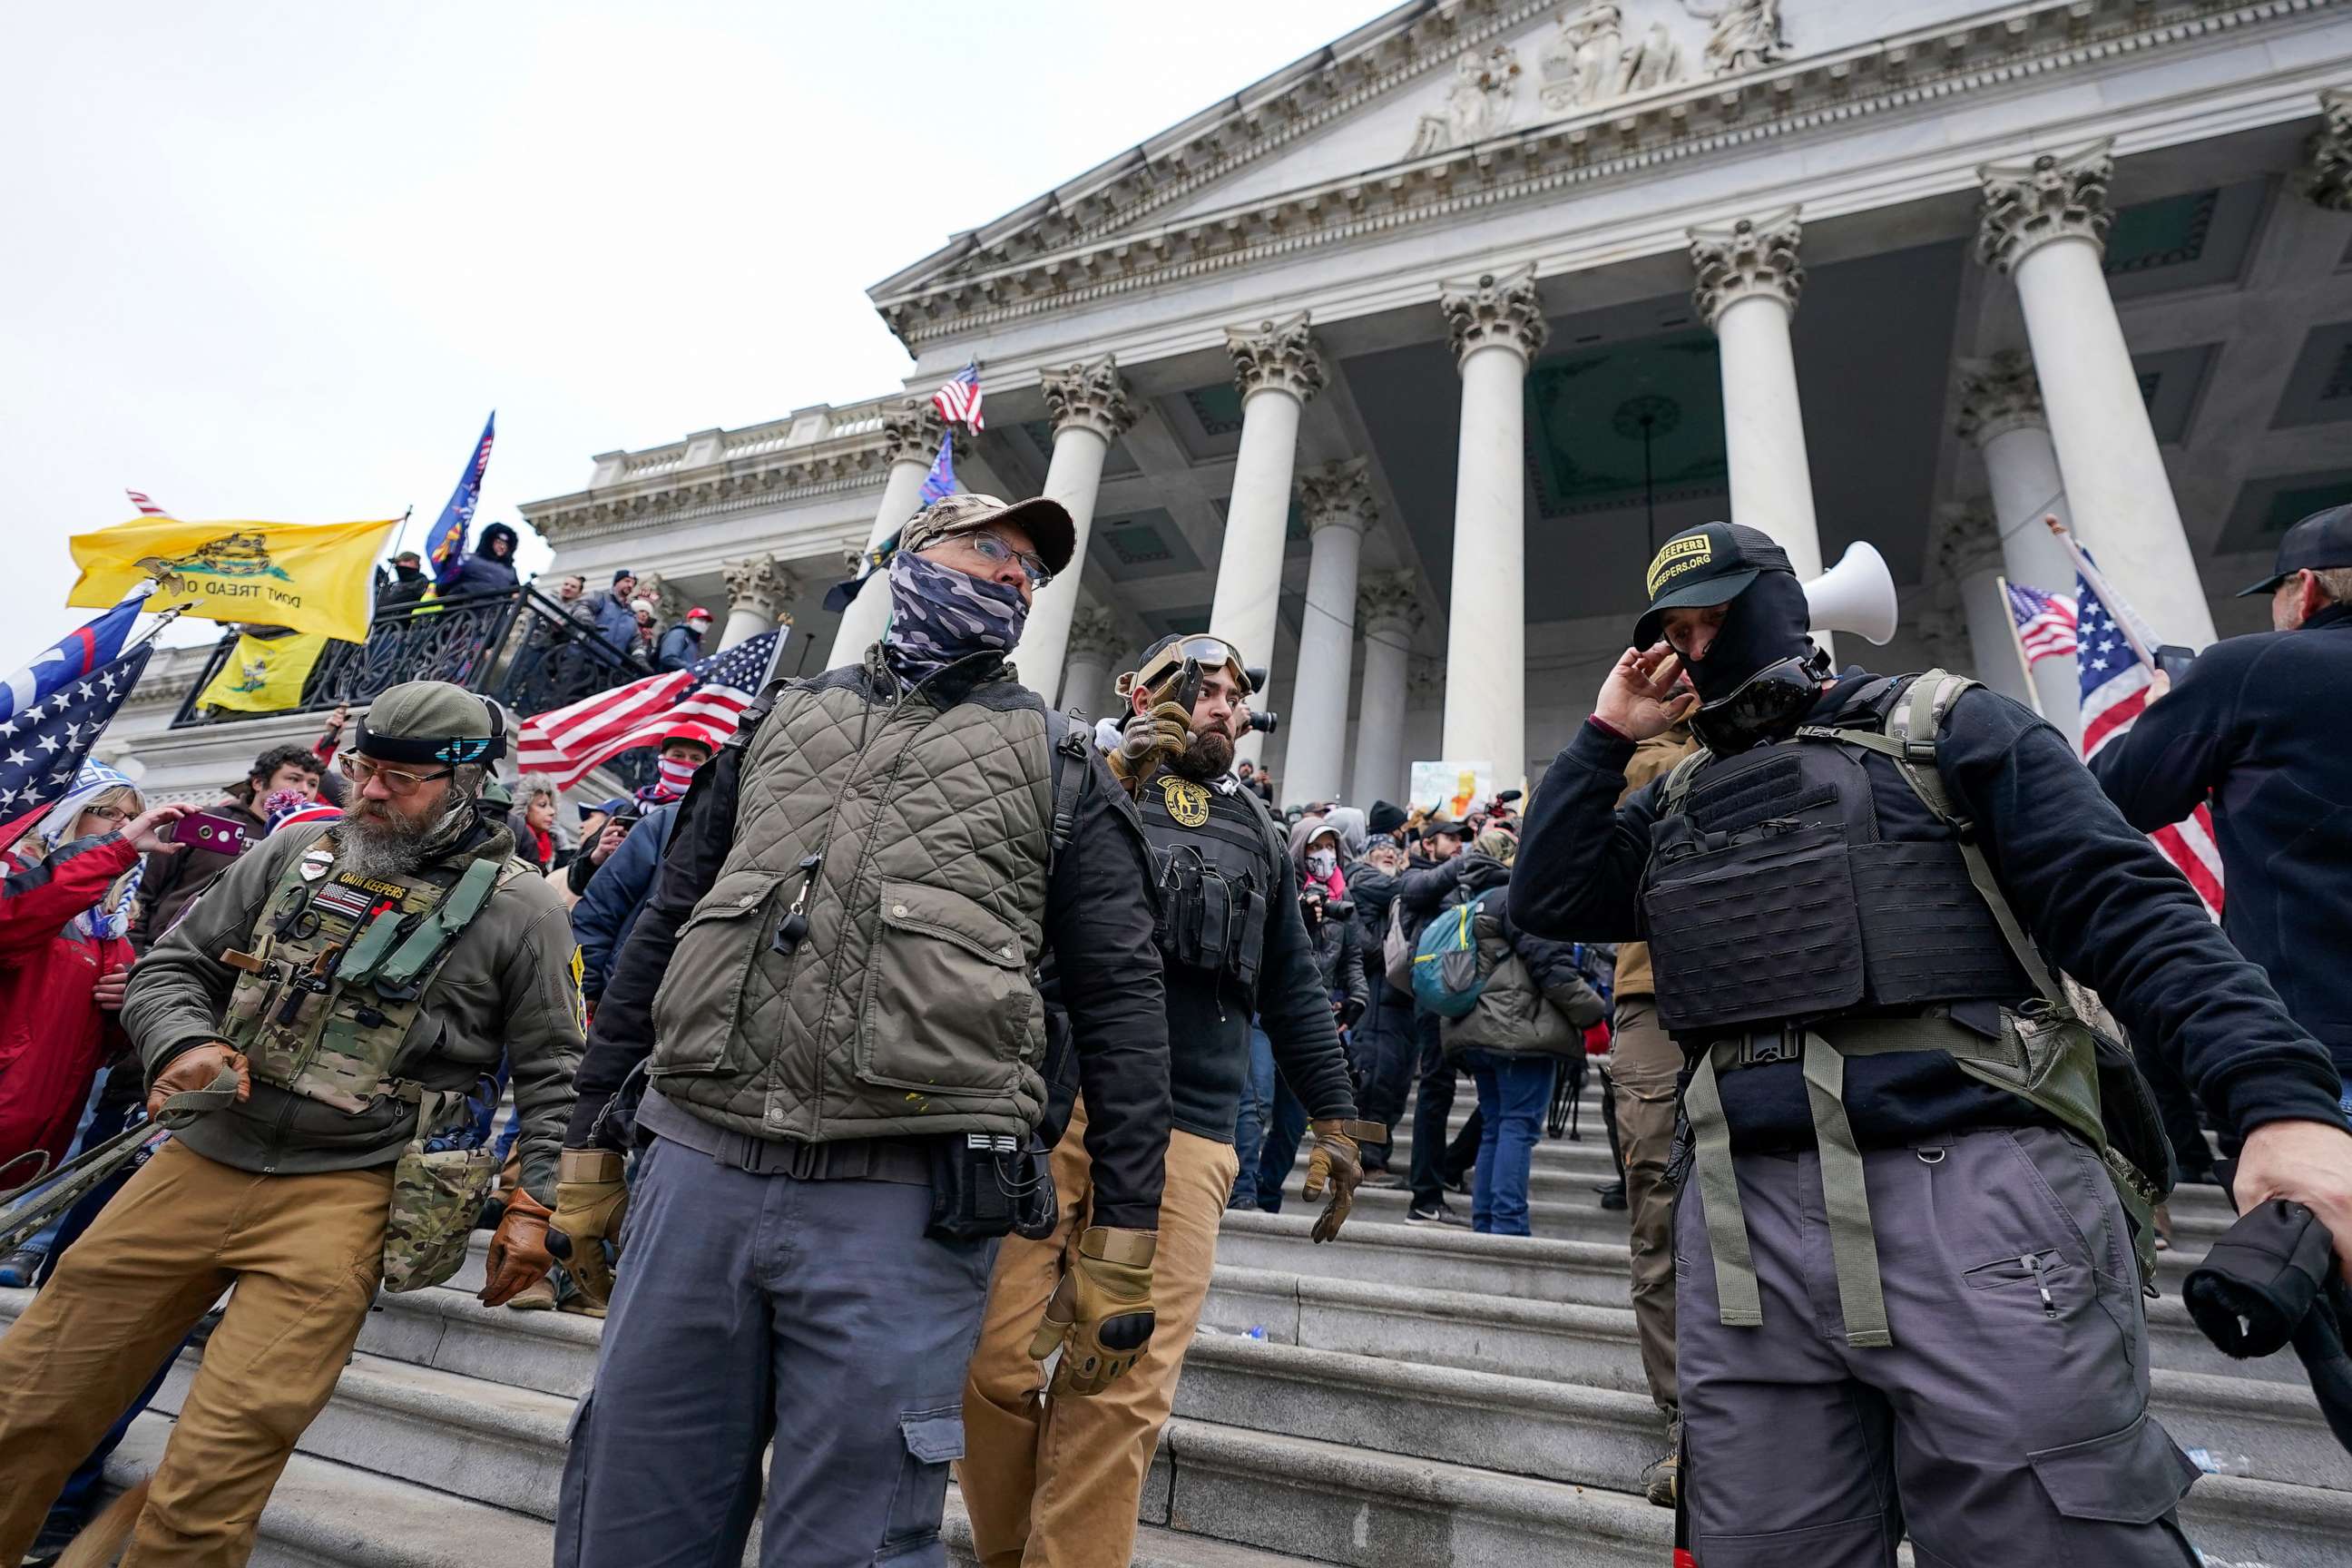 PHOTO: Members of the Oath Keepers extremist group stand on the East Front of the U.S. Capitol on Jan. 6, 2021, in Washington, D.C.